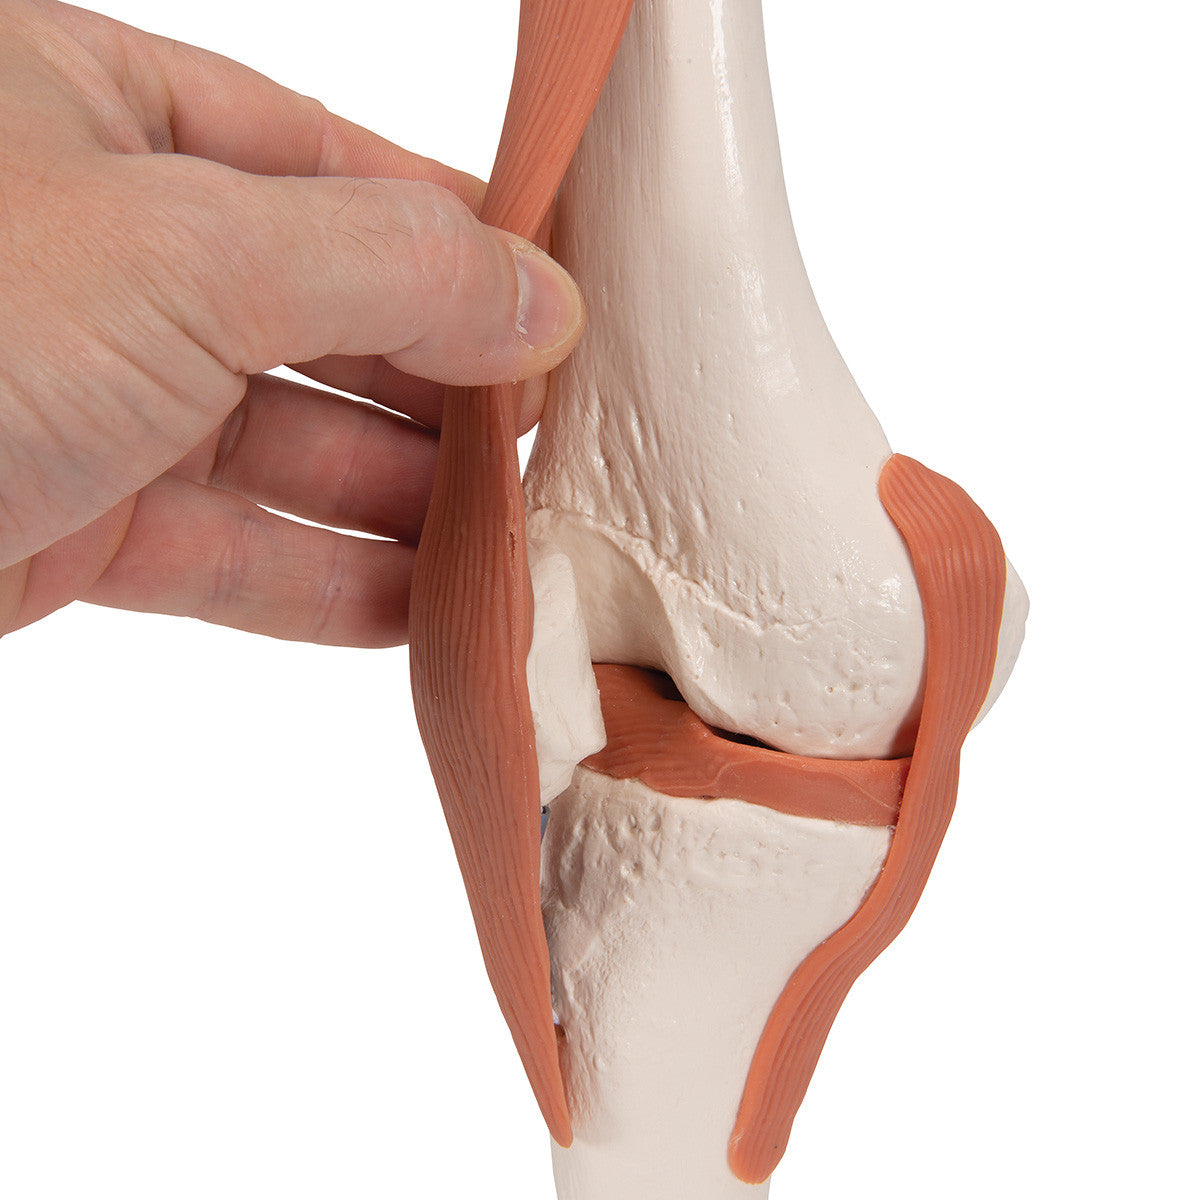 a82_06_1200_1200_functional-human-knee-joint-model-with-ligaments-3b-smart-anatomy__33824.1589753314.1280.1280.jpg